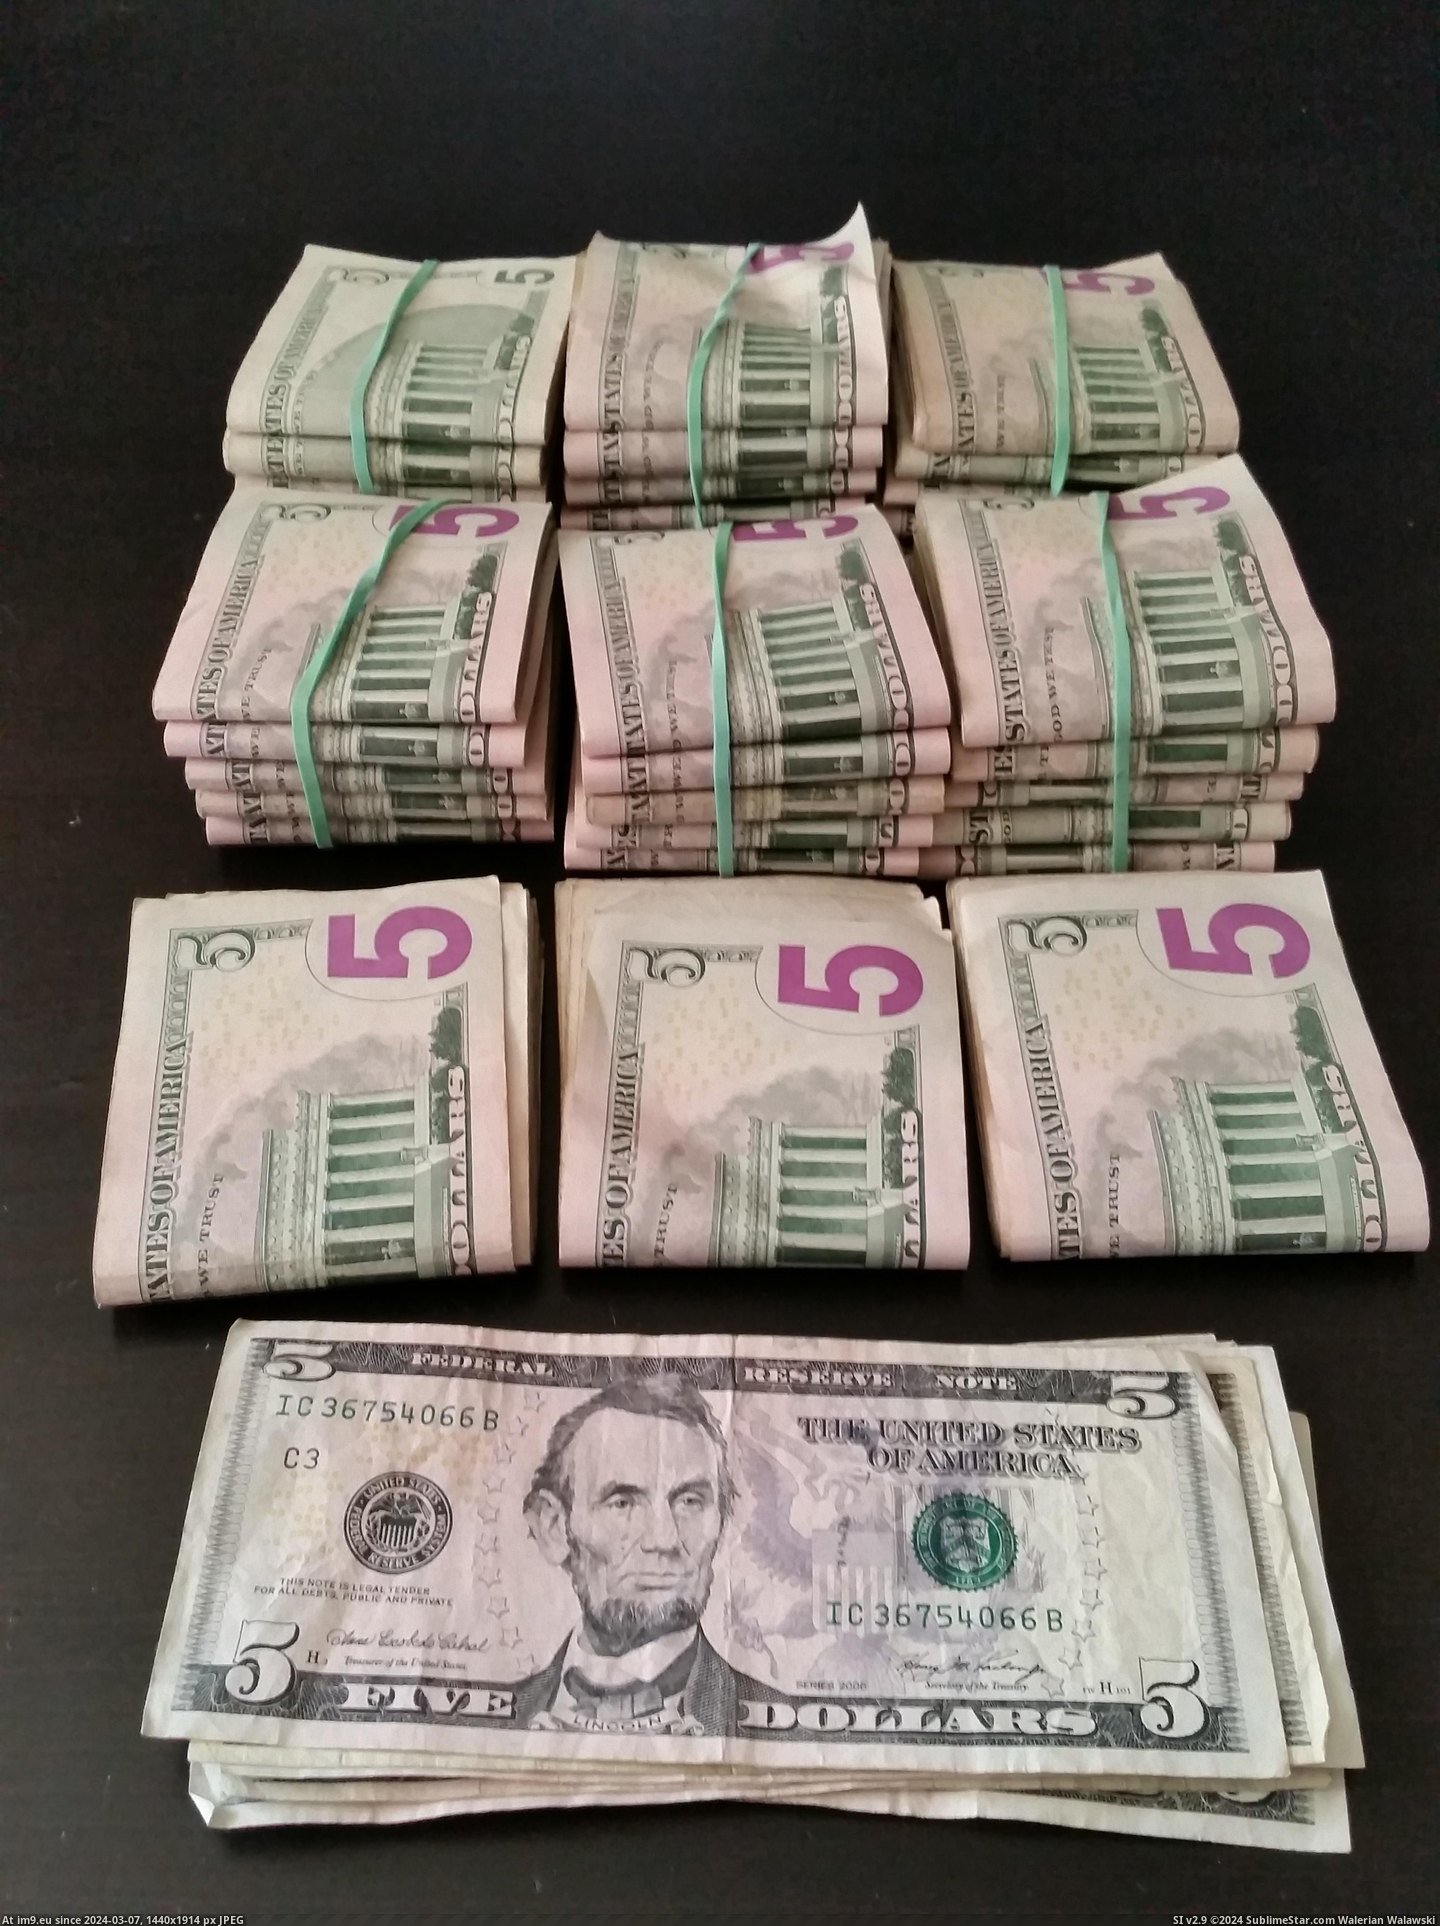 #For #Year #Put #Possession #Saved #Bill [Pics] For the past year, I put away every $5 bill that came into my possession. To date, I've saved $3,335. Pic. (Obraz z album My r/PICS favs))